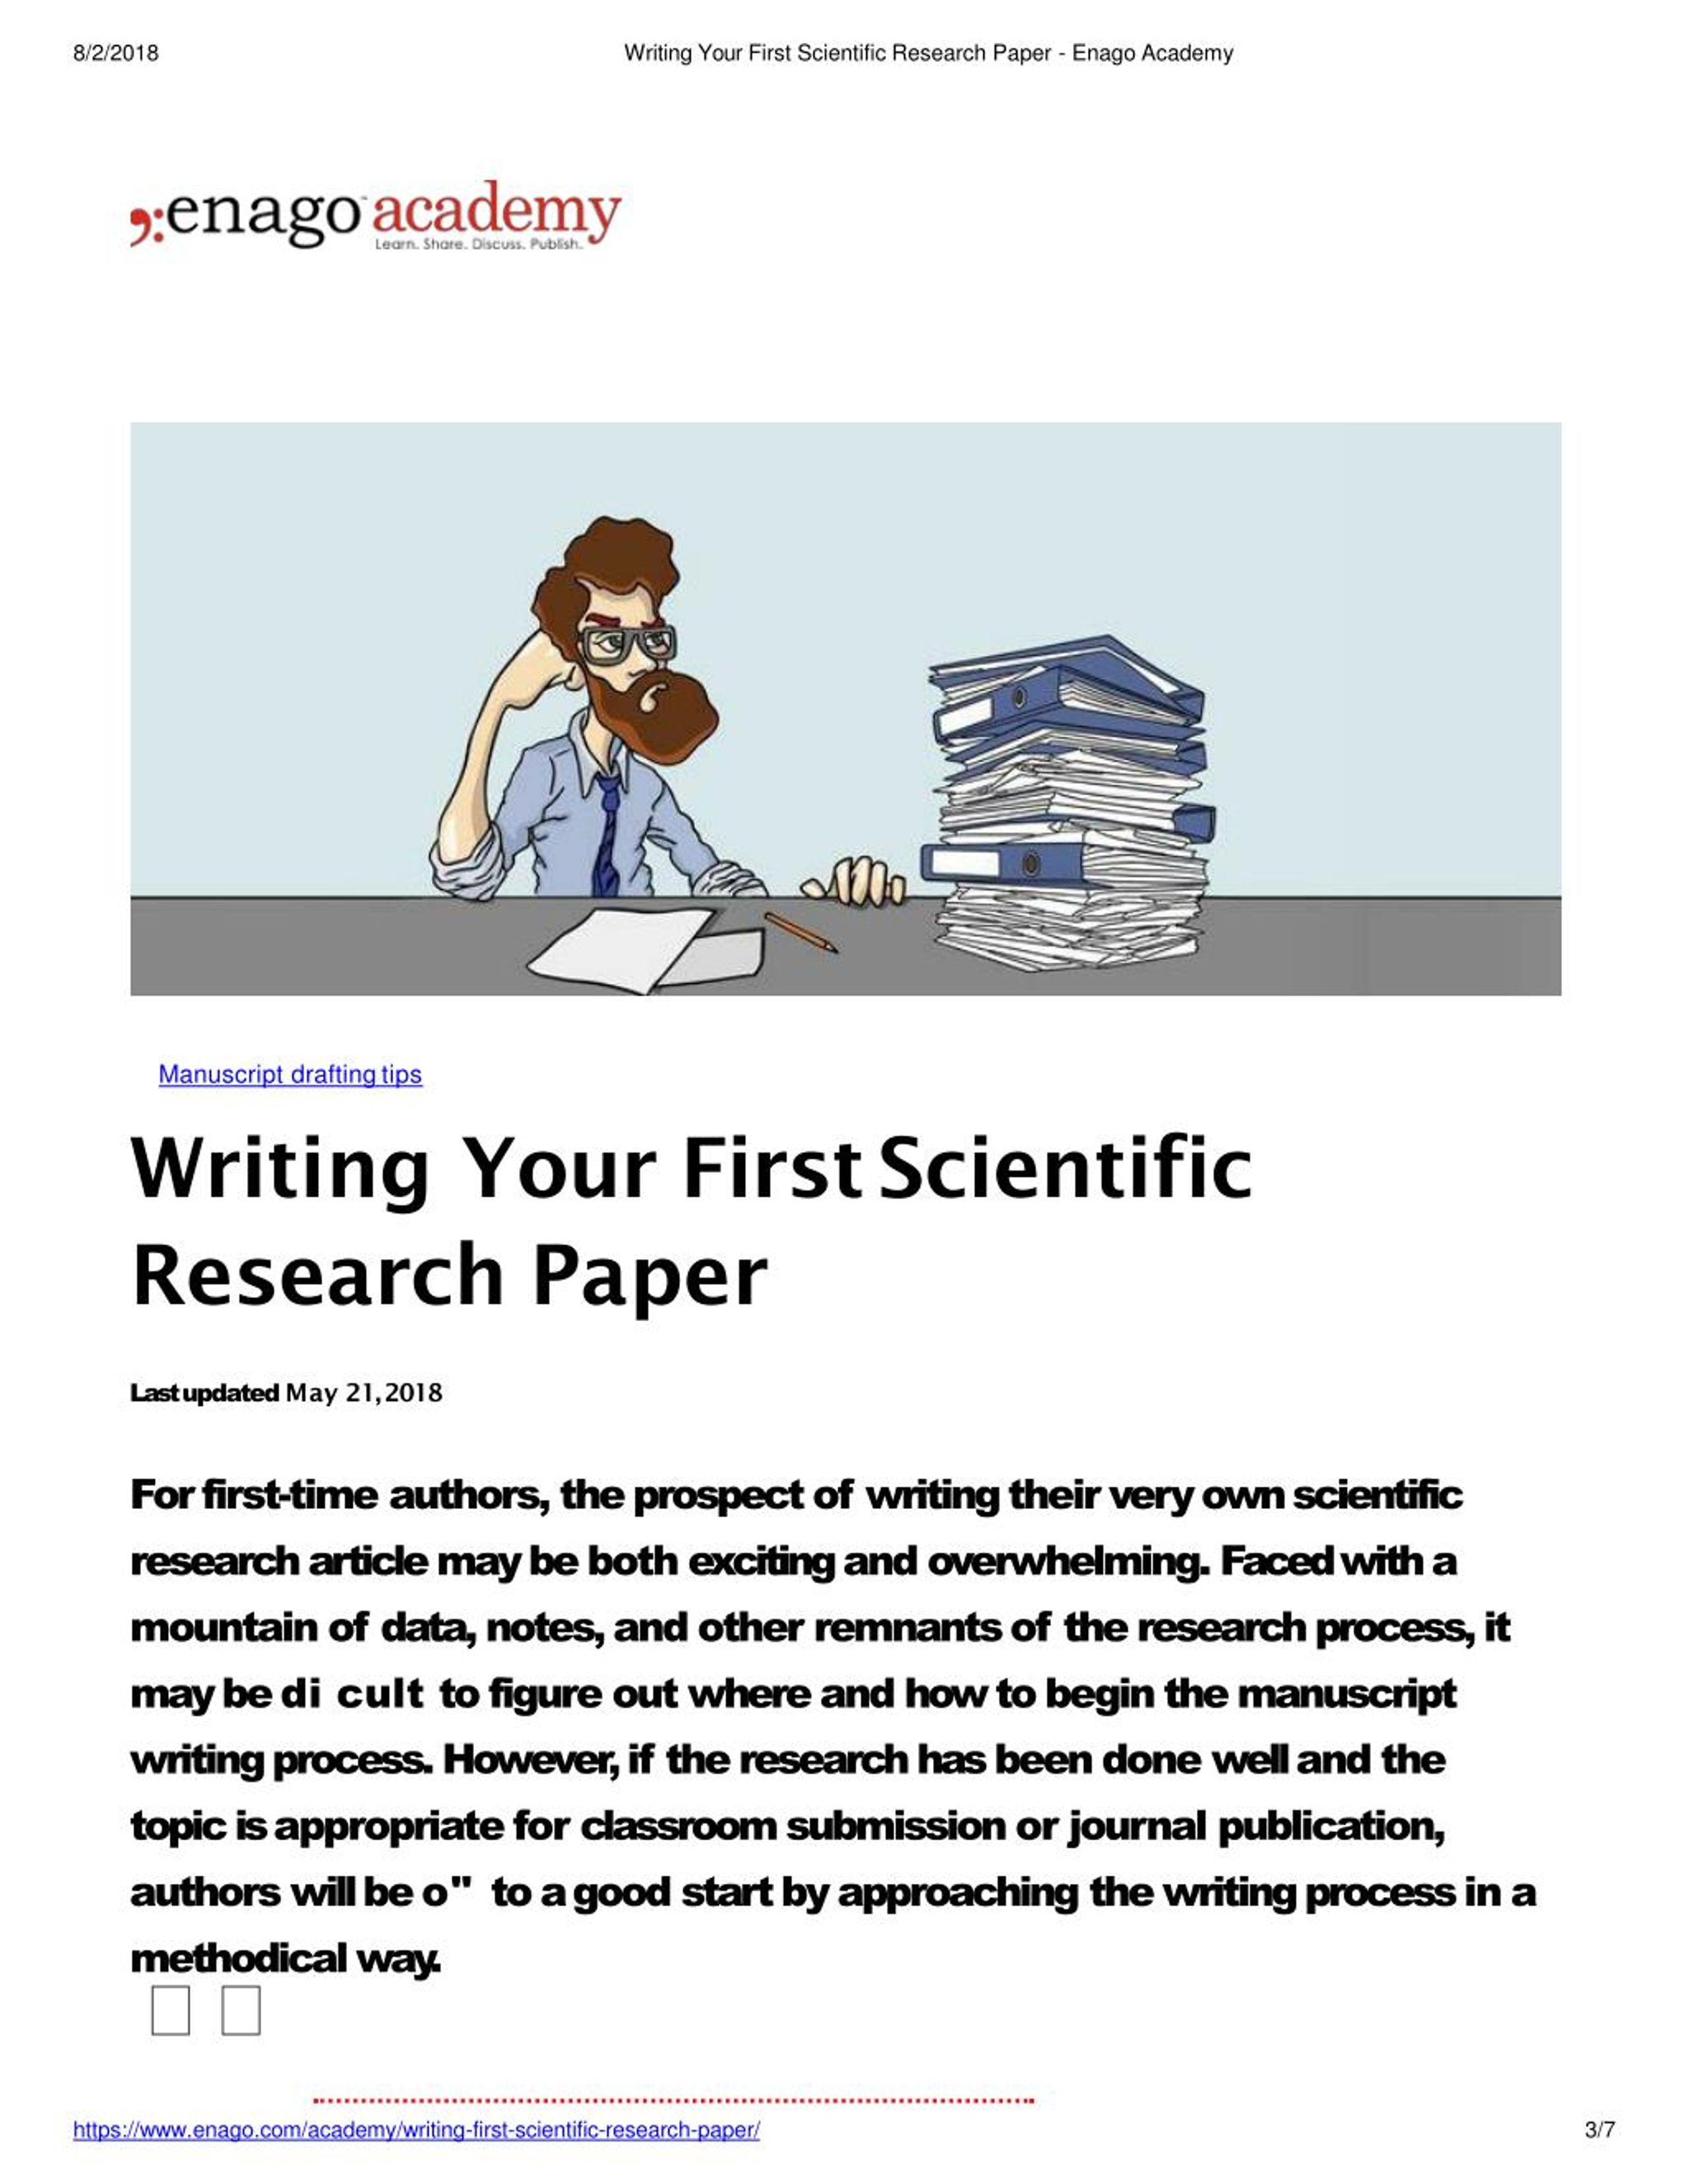 how to write your first research paper